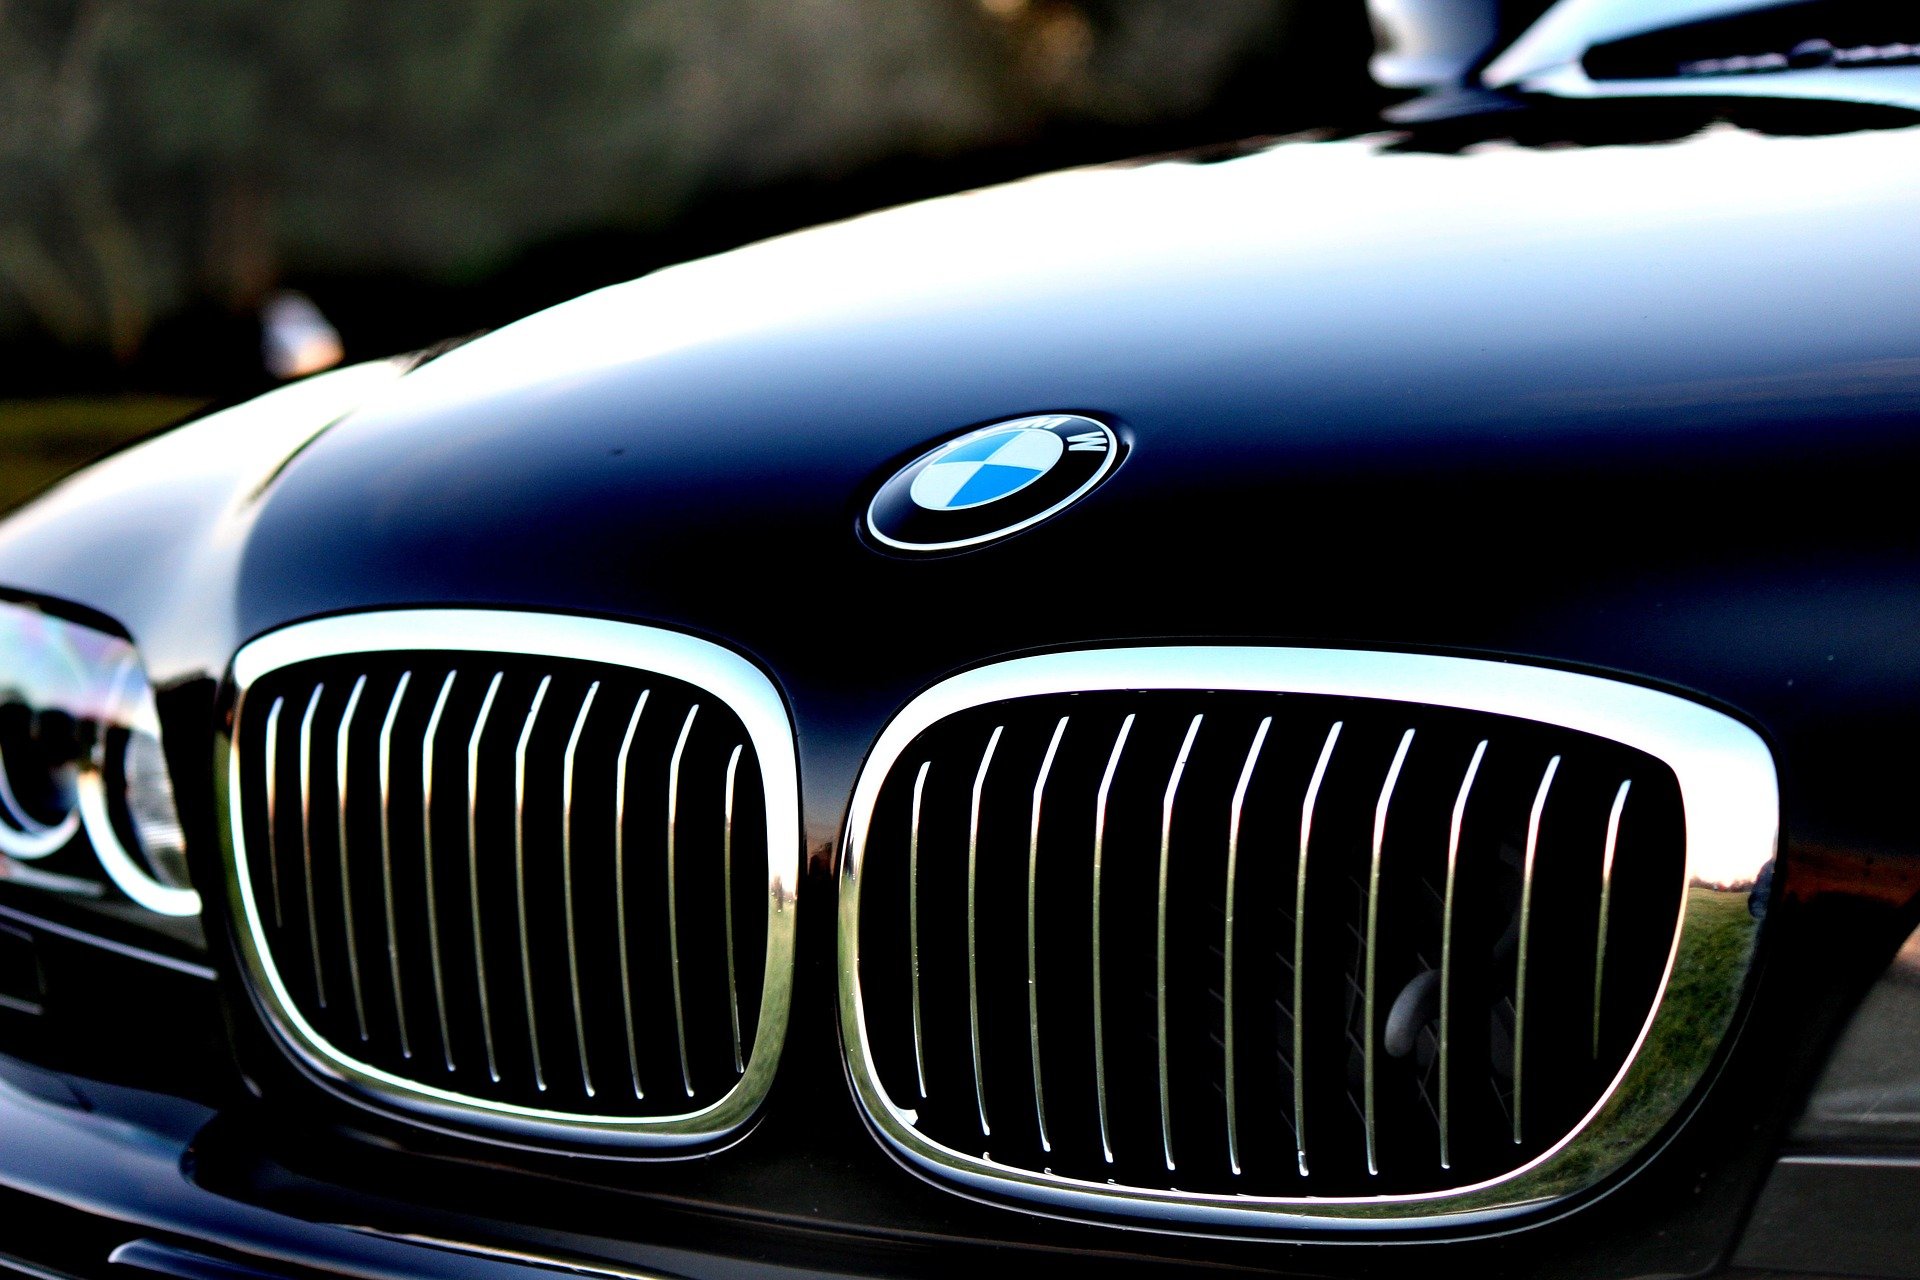 Pictured - A close up of a BMW hood | Source: Pixabay 